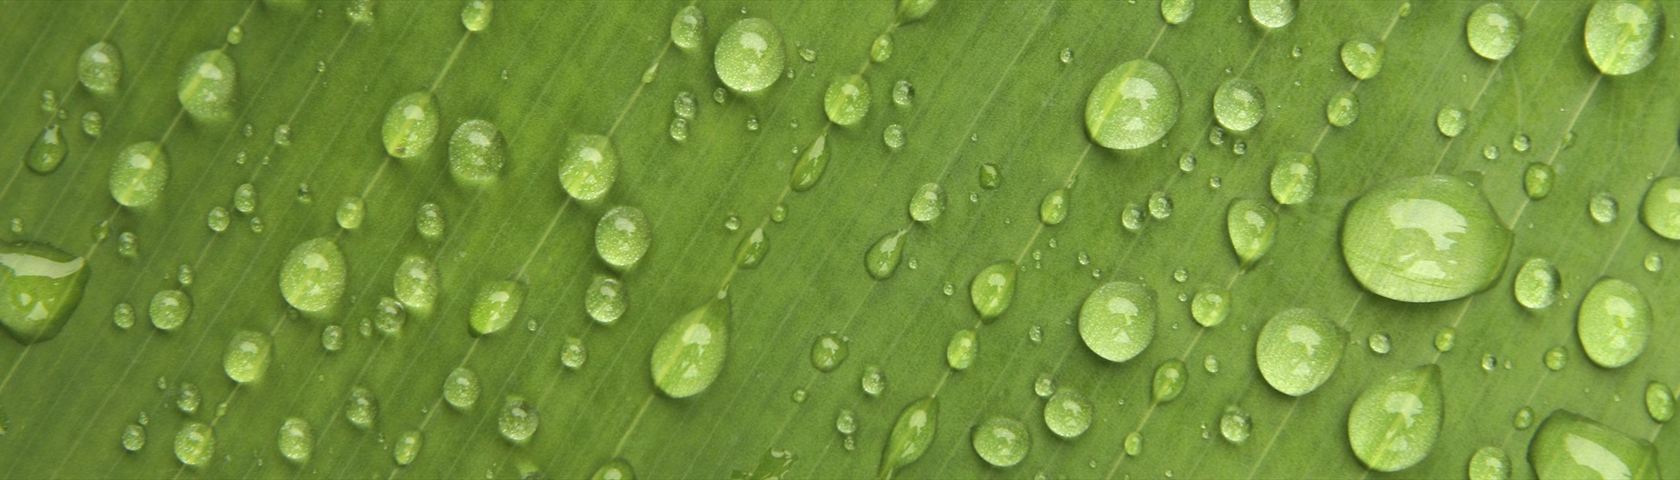 Water Drops on a Leaf